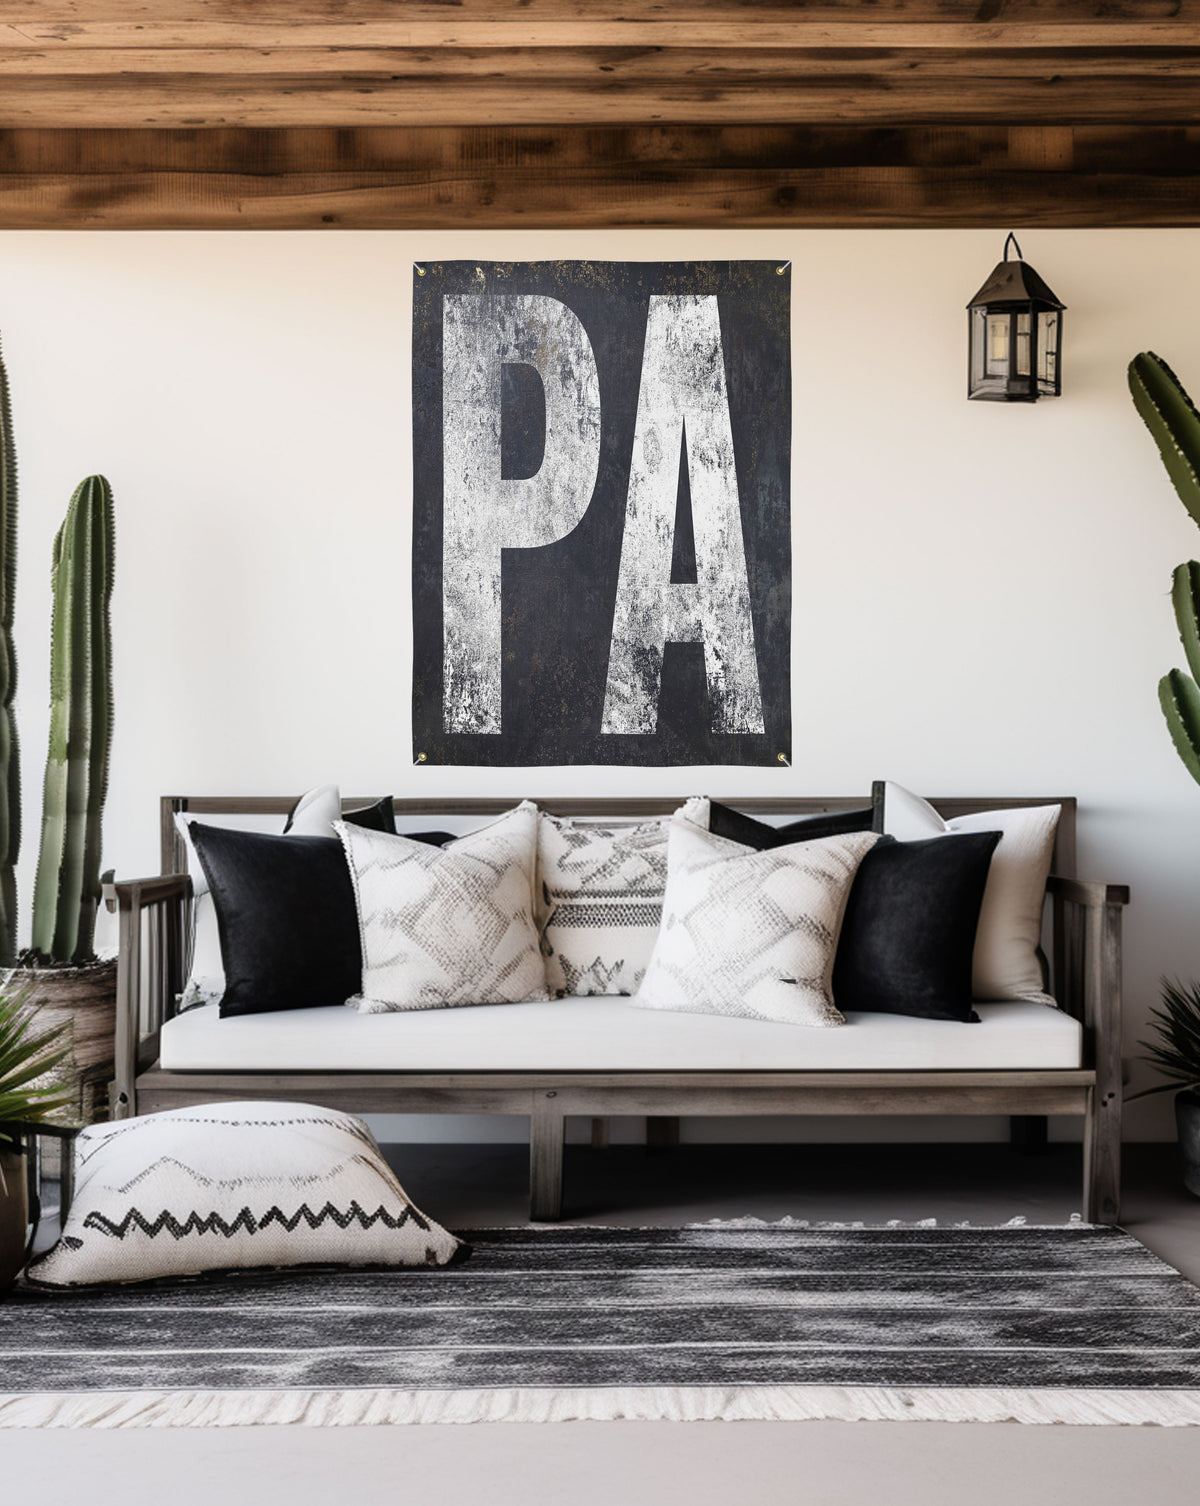 Cute and sturdy Pennsylvania home state garden sign, designed in a rustic boho chic style for exterior decor.